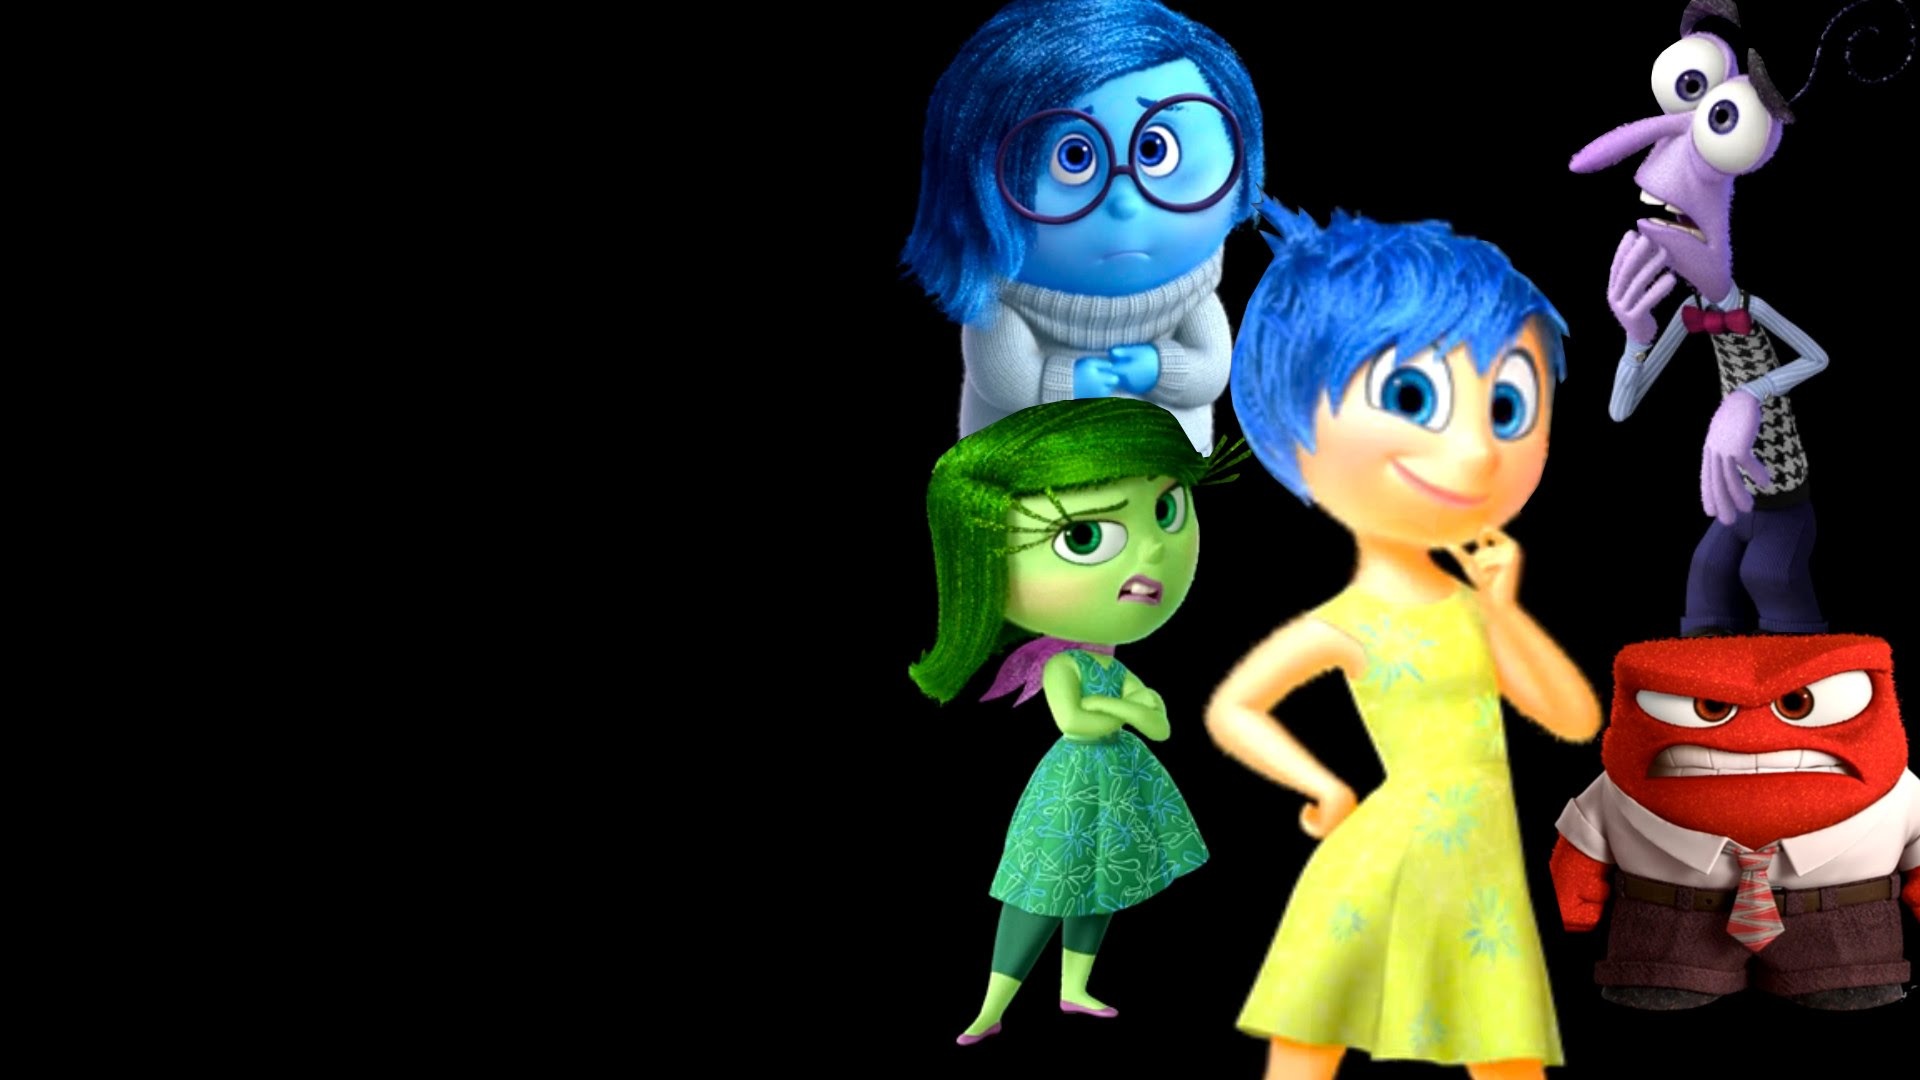 Inside Out Movie Pictures Download Free Desktop Wallpaper Images